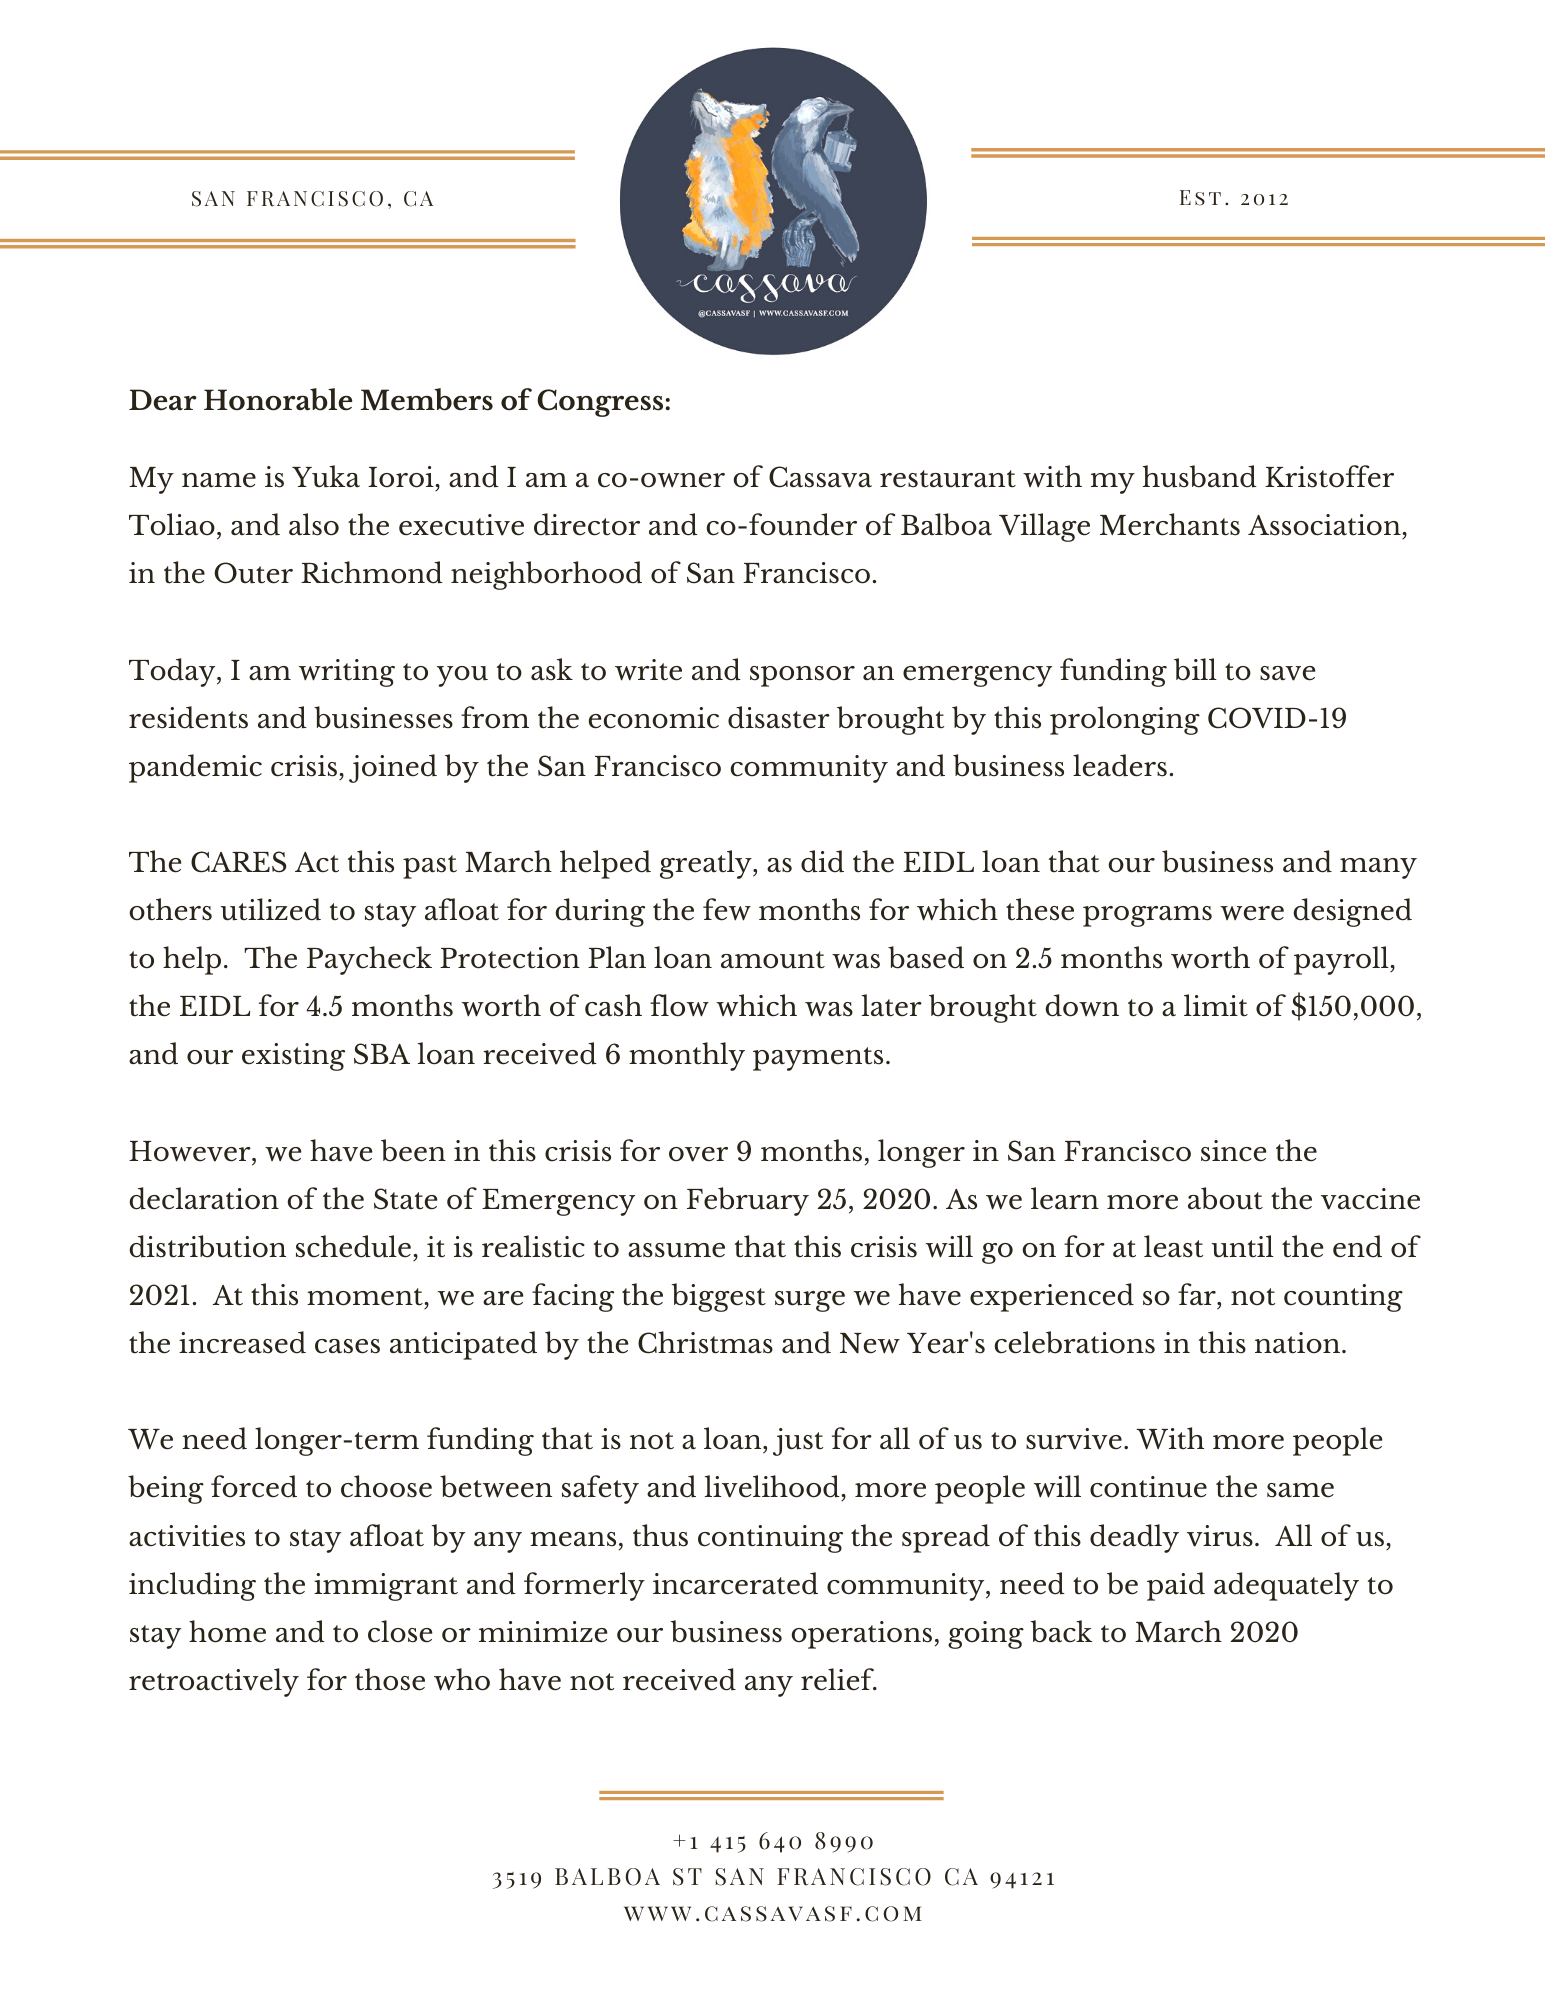 Letter to Congress 12.17.2020.png